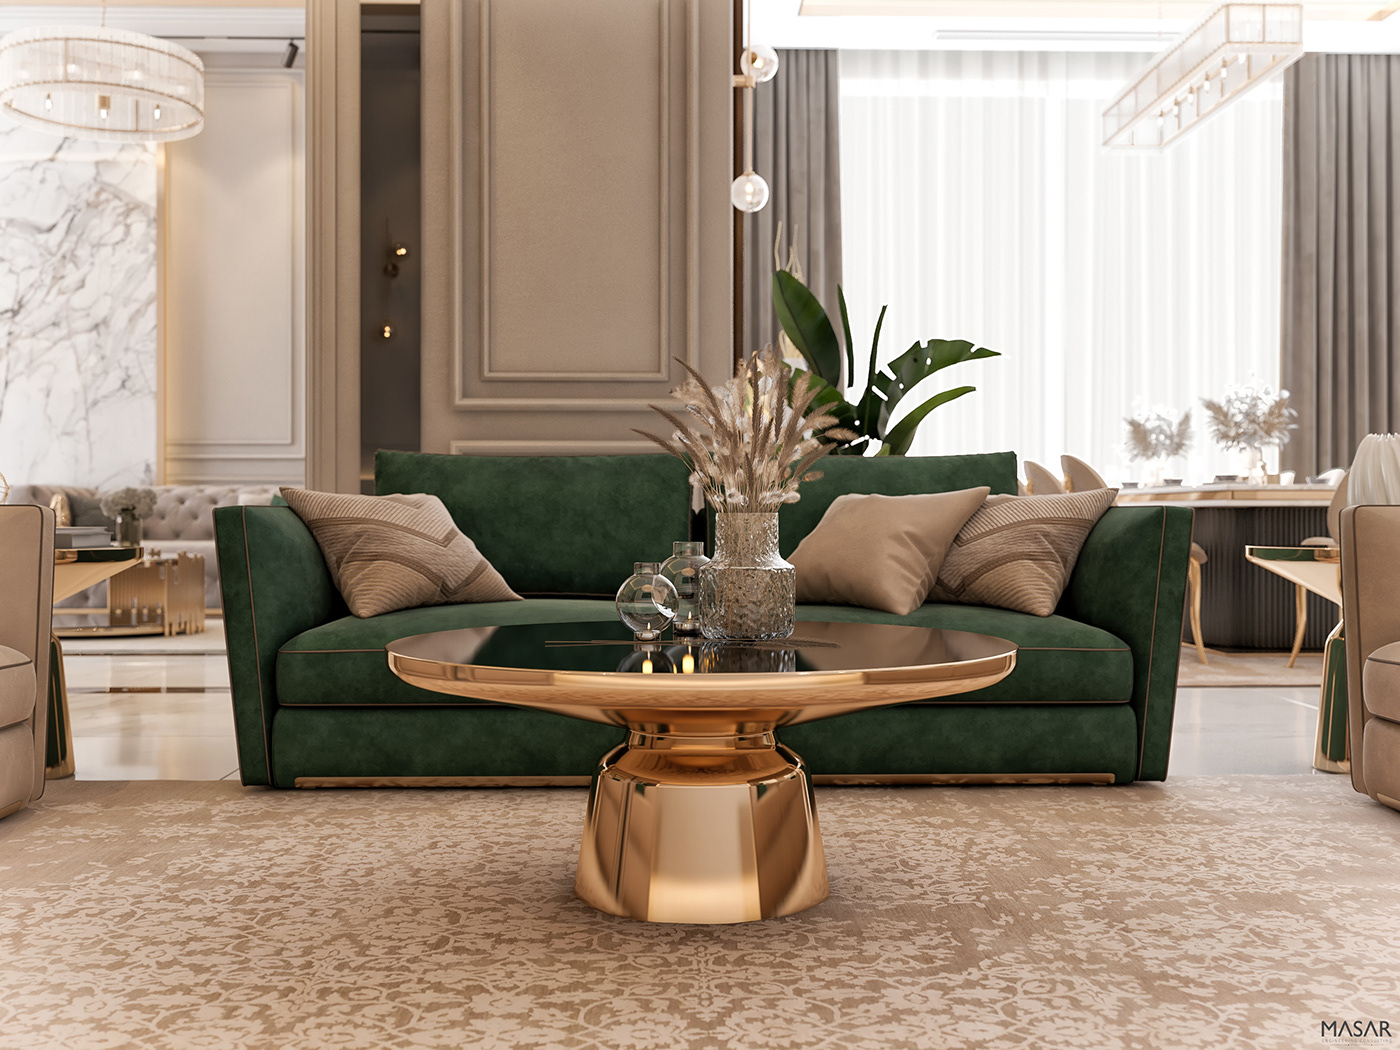 3D 3dsmax 3dviz architecture archviz beige console Covet design dining Entrance furniture green house Interior living luxurious luxury MAJLIS Marble mirror modelling Post Production reception Render rendering residential room toilet Villa visualization vray washers wc wood